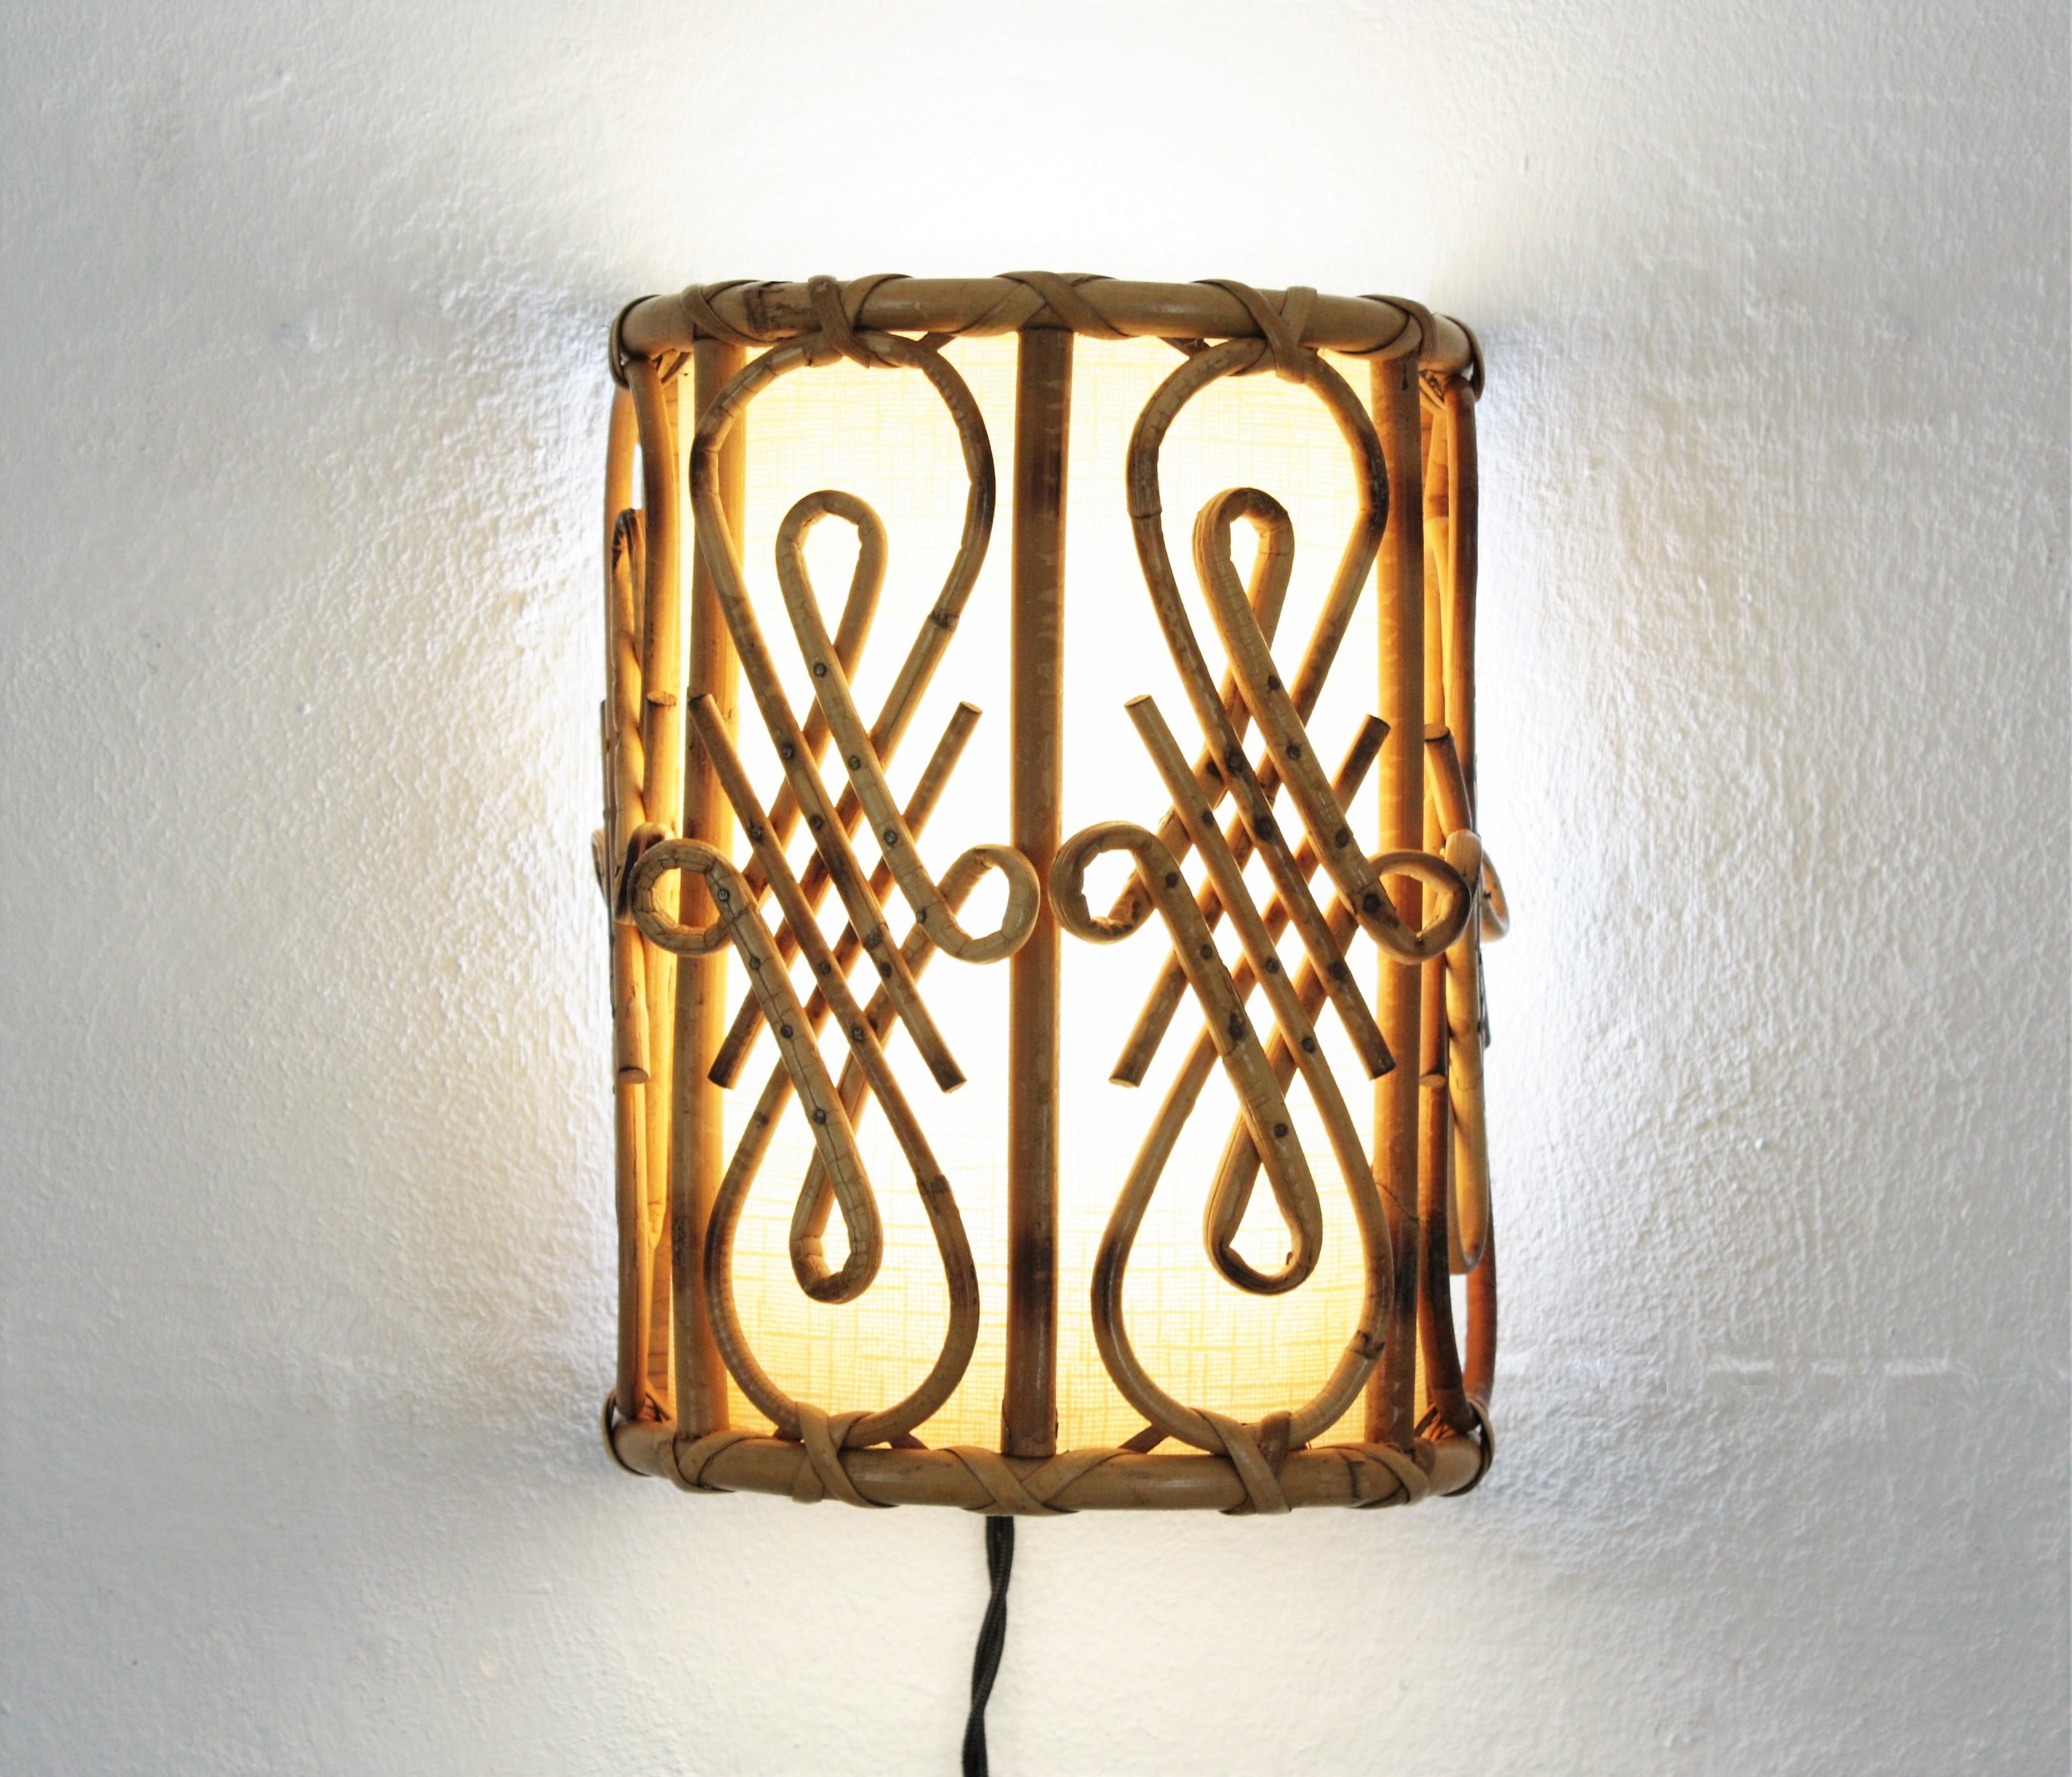 Cane Rattan Oriental Inspired French Modernist Wall Sconces, Pair